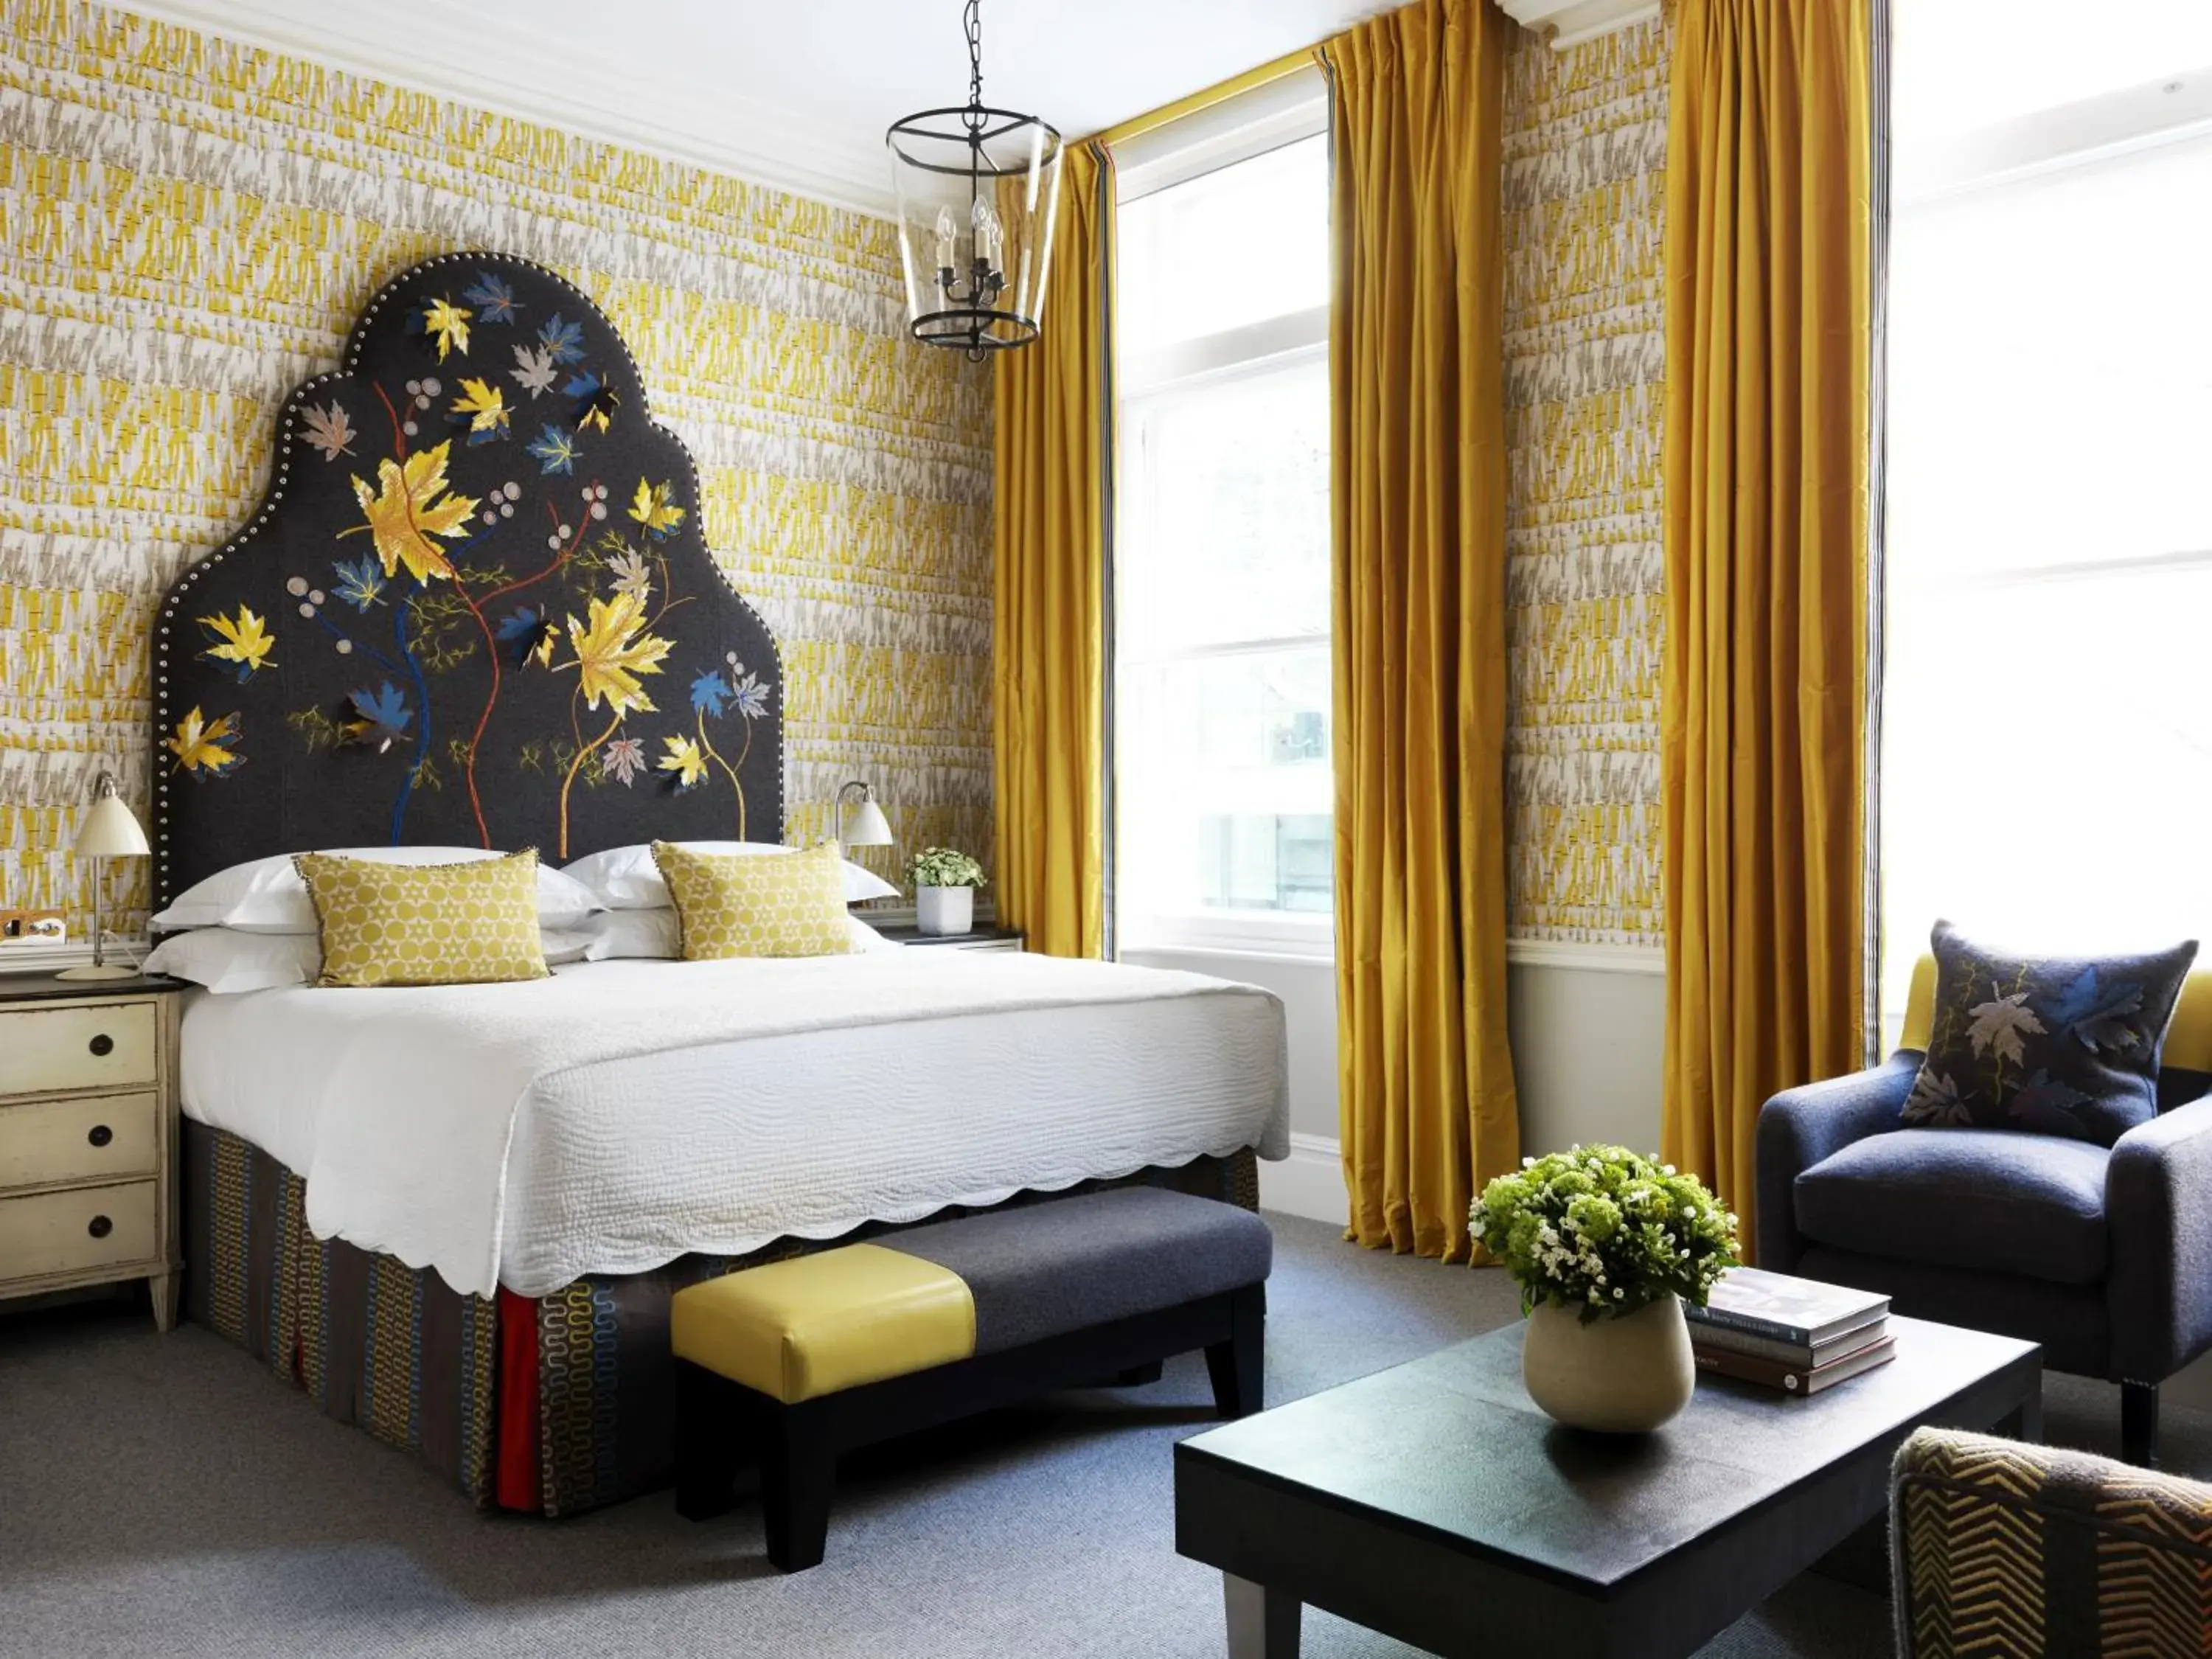 Bed in Covent Garden Hotel, Firmdale Hotels